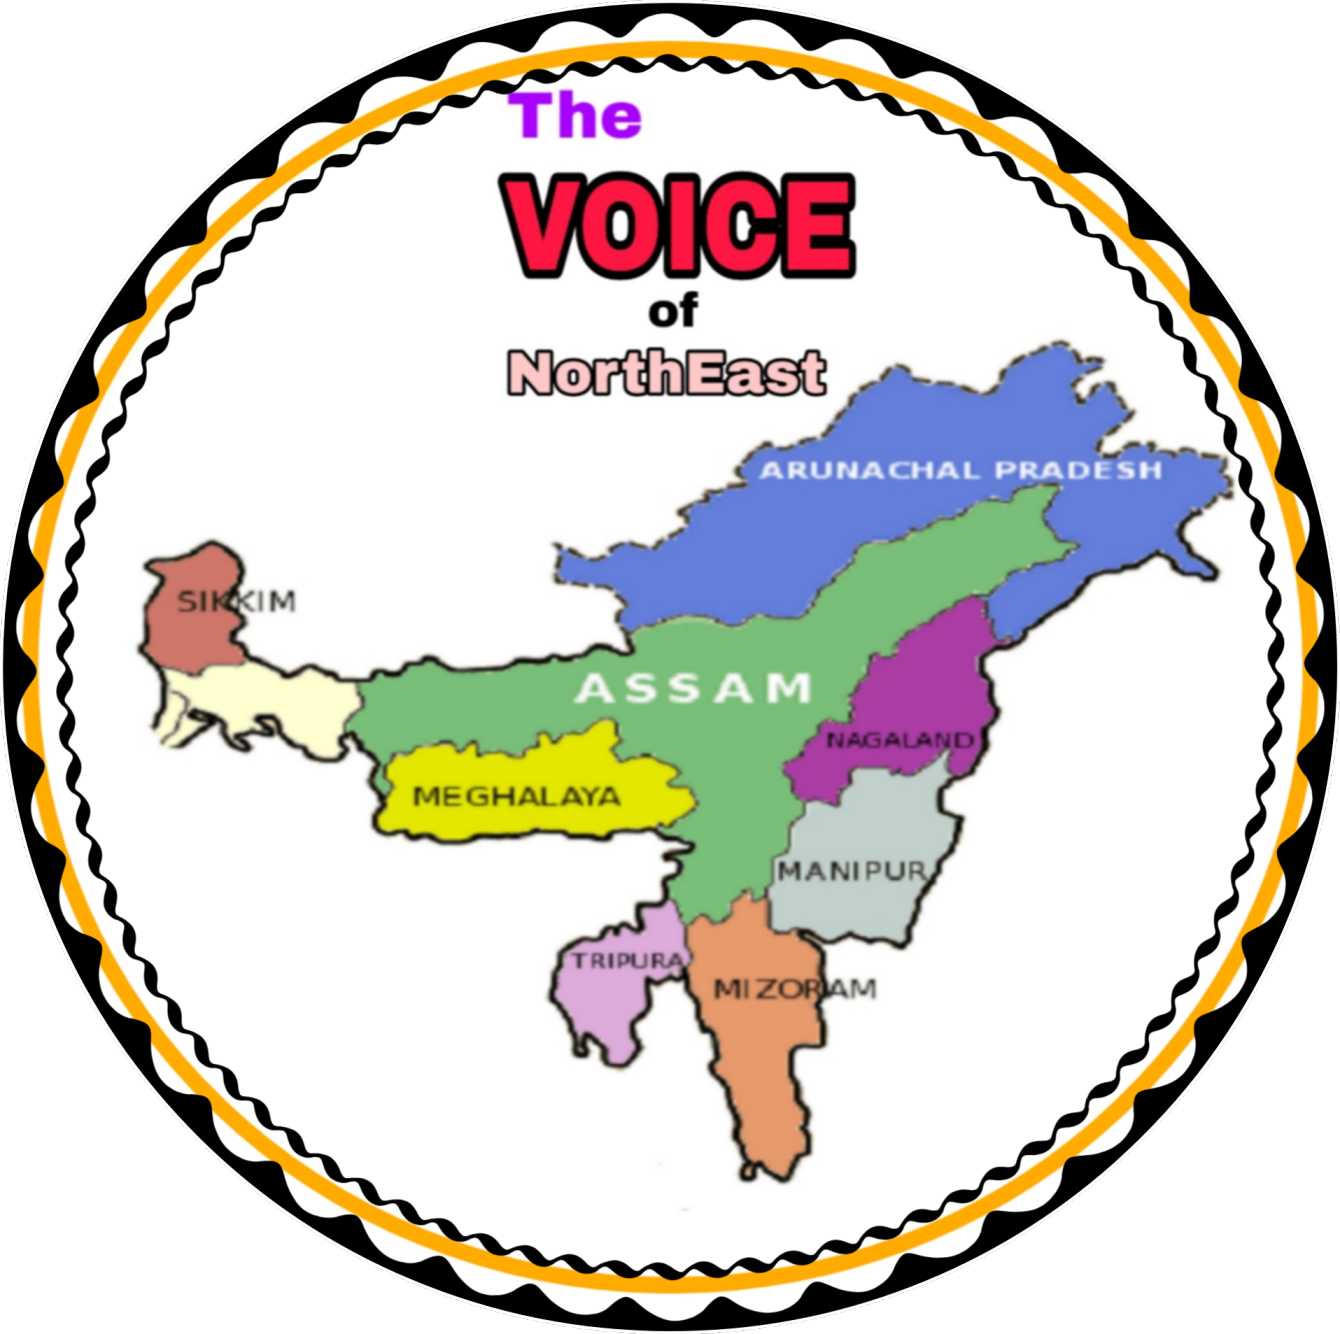 The Voice of North East